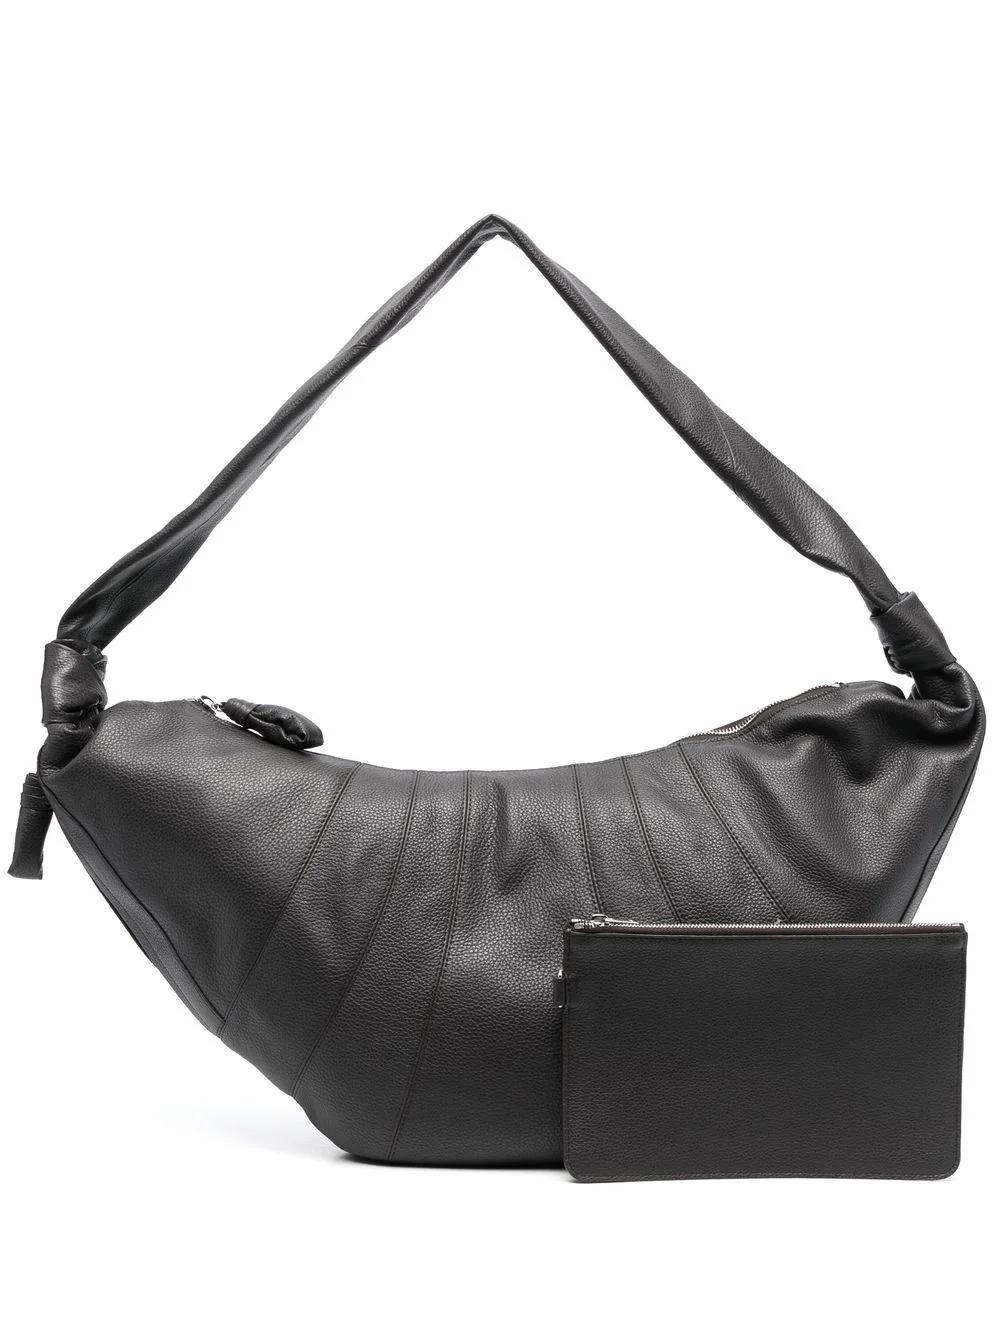 Lemaire Soft Grained Leather Large Croissant Bag in Black | Lyst